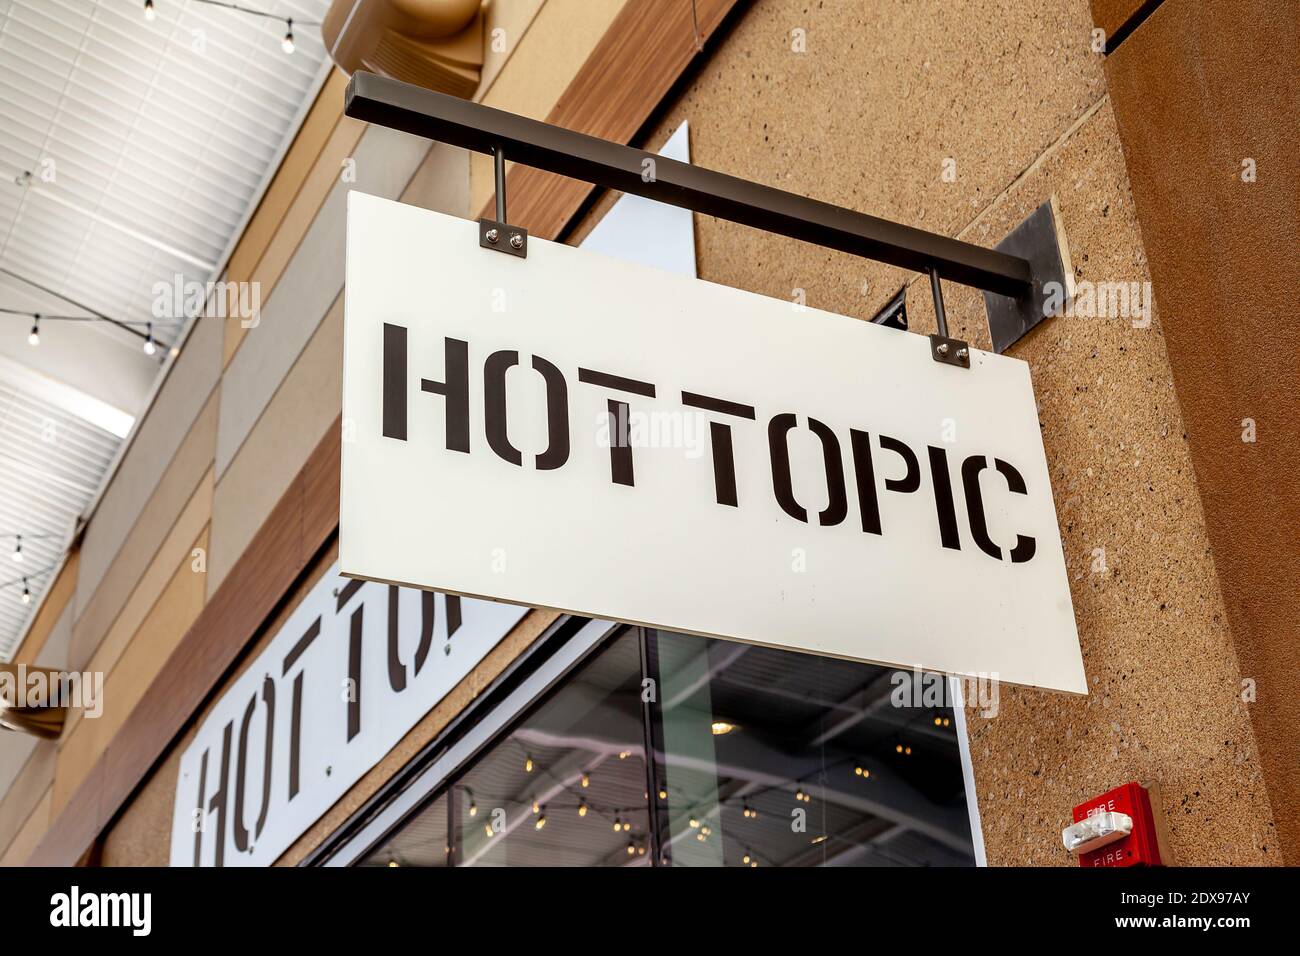 Hot Topic store is seen in Niagara-on-the-Lake, Ontario, Canada Stock Photo